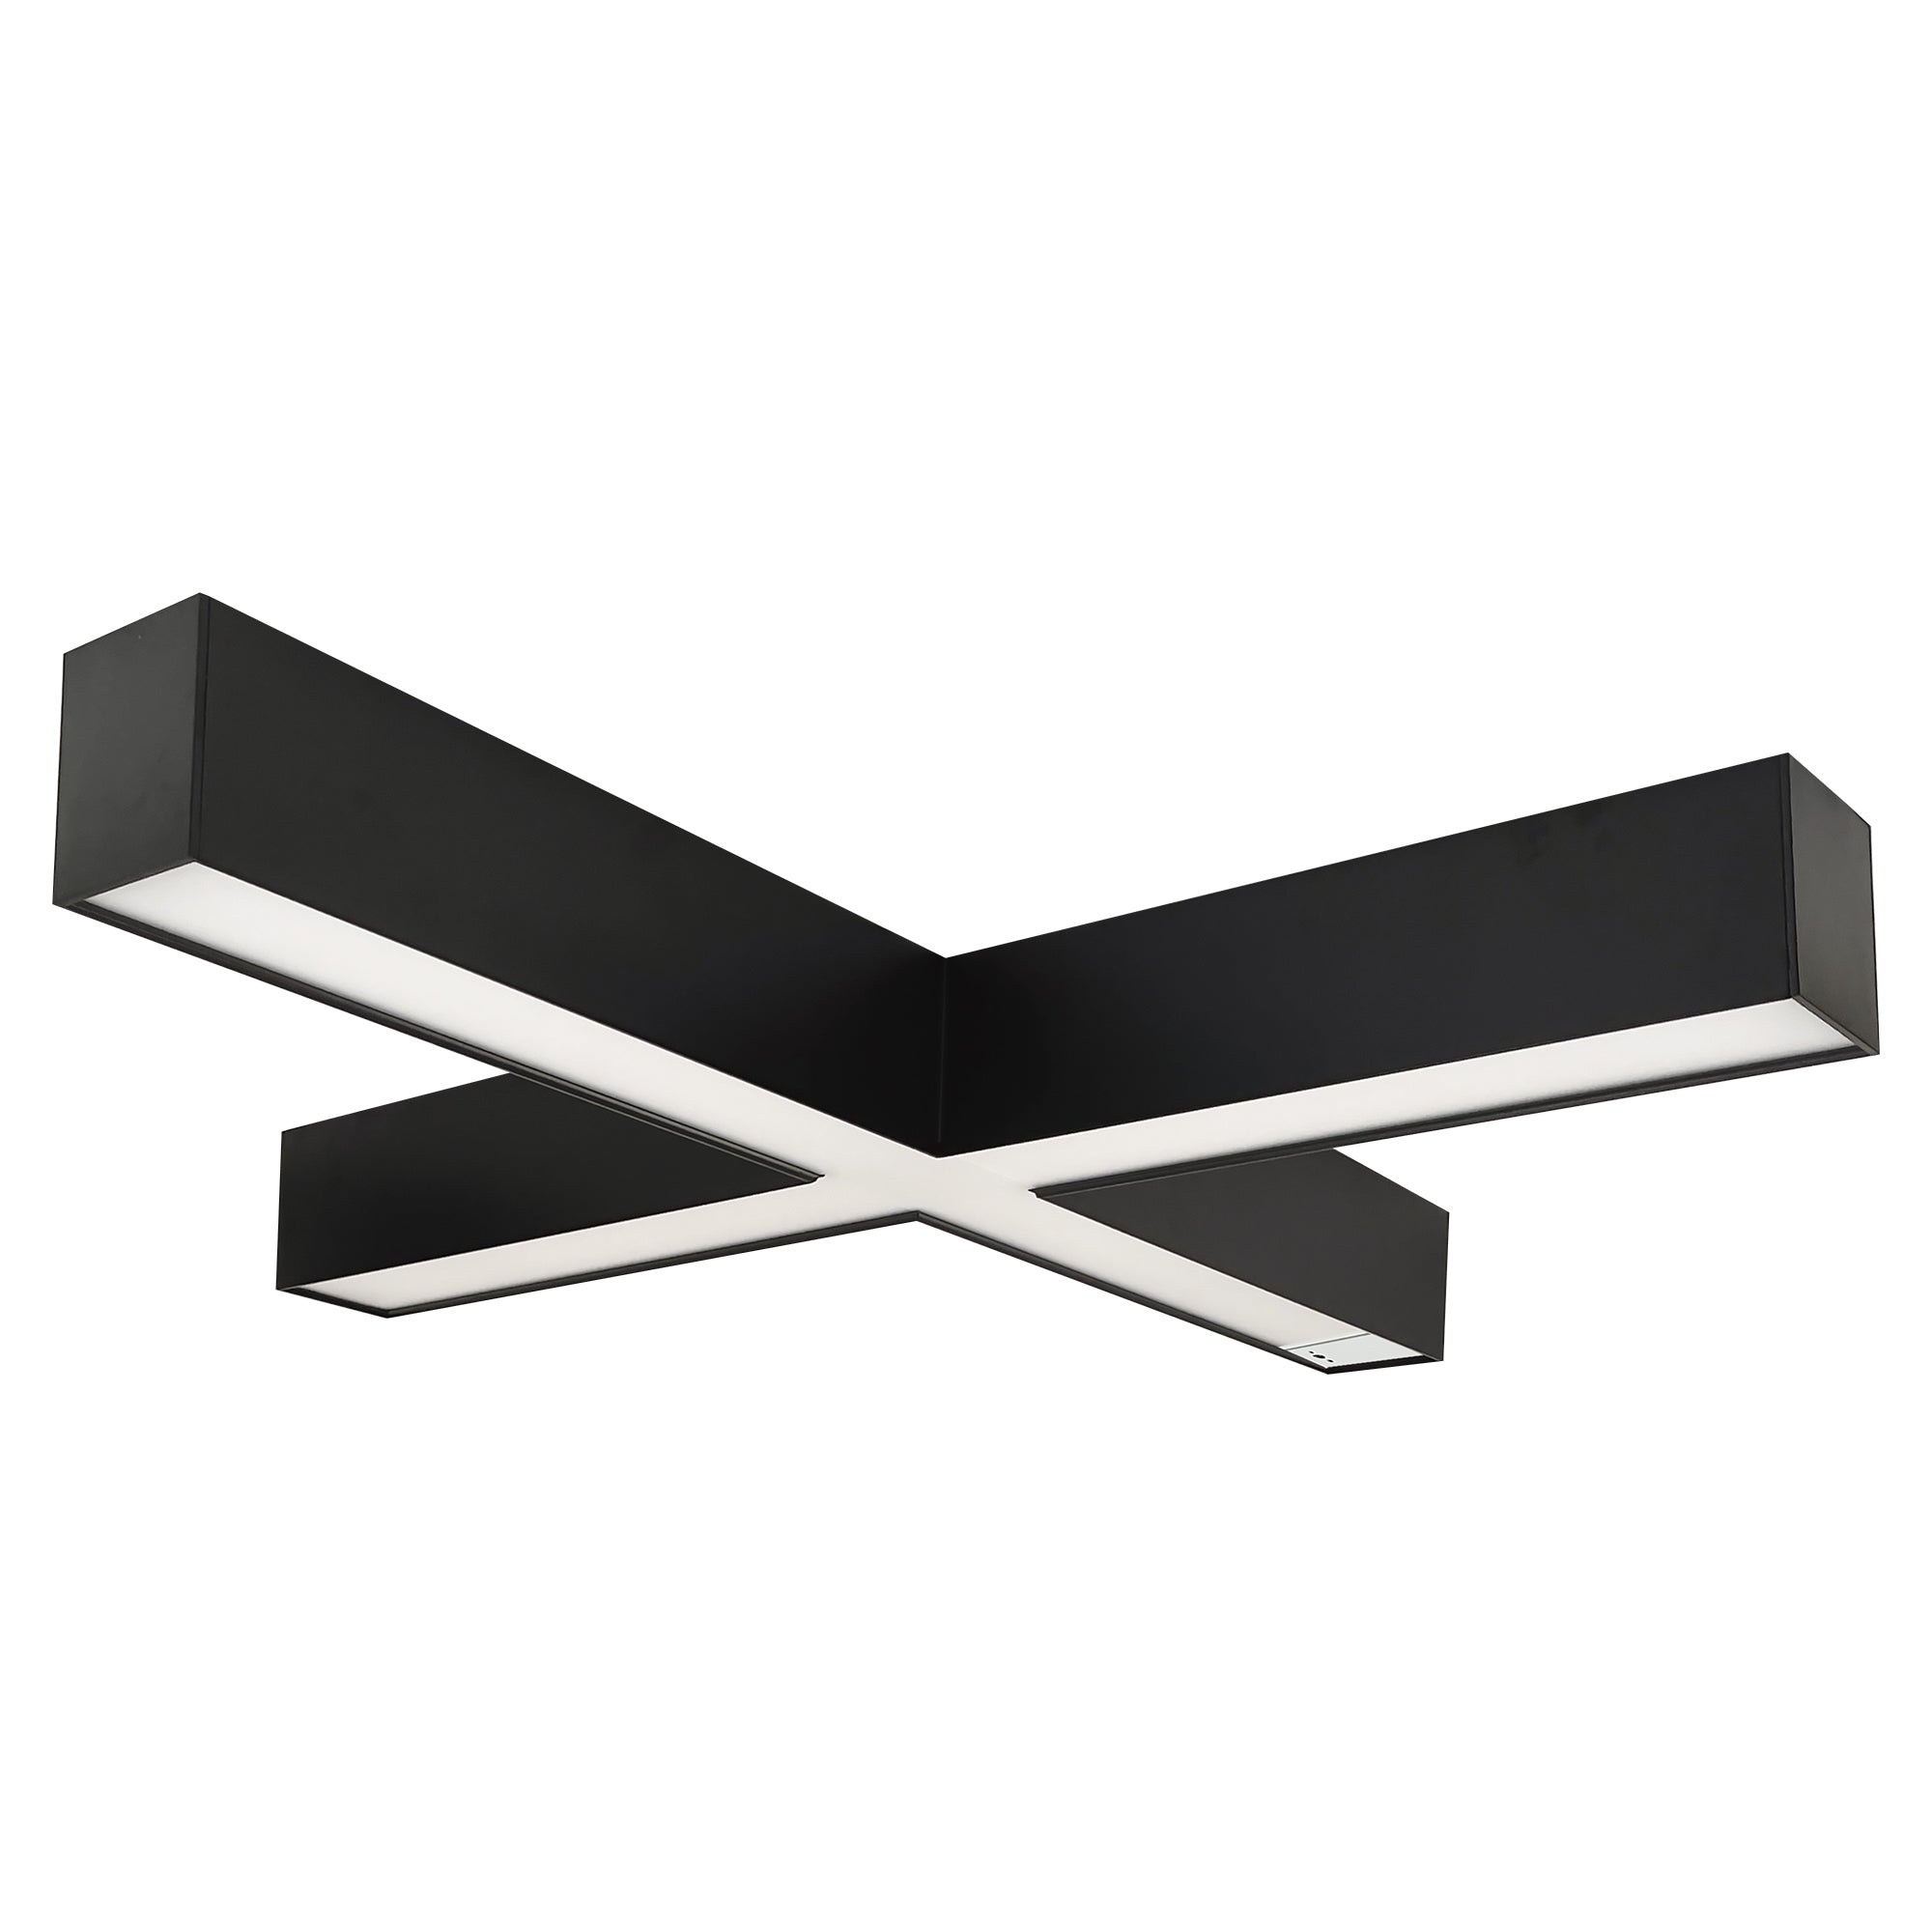 Nora Lighting NLUD-X334B/OS - Linear -  InchX Inch Shaped L-Line LED Indirect/Direct Linear, 6028lm / Selectable CCT, Black finish, with Motion Sensor